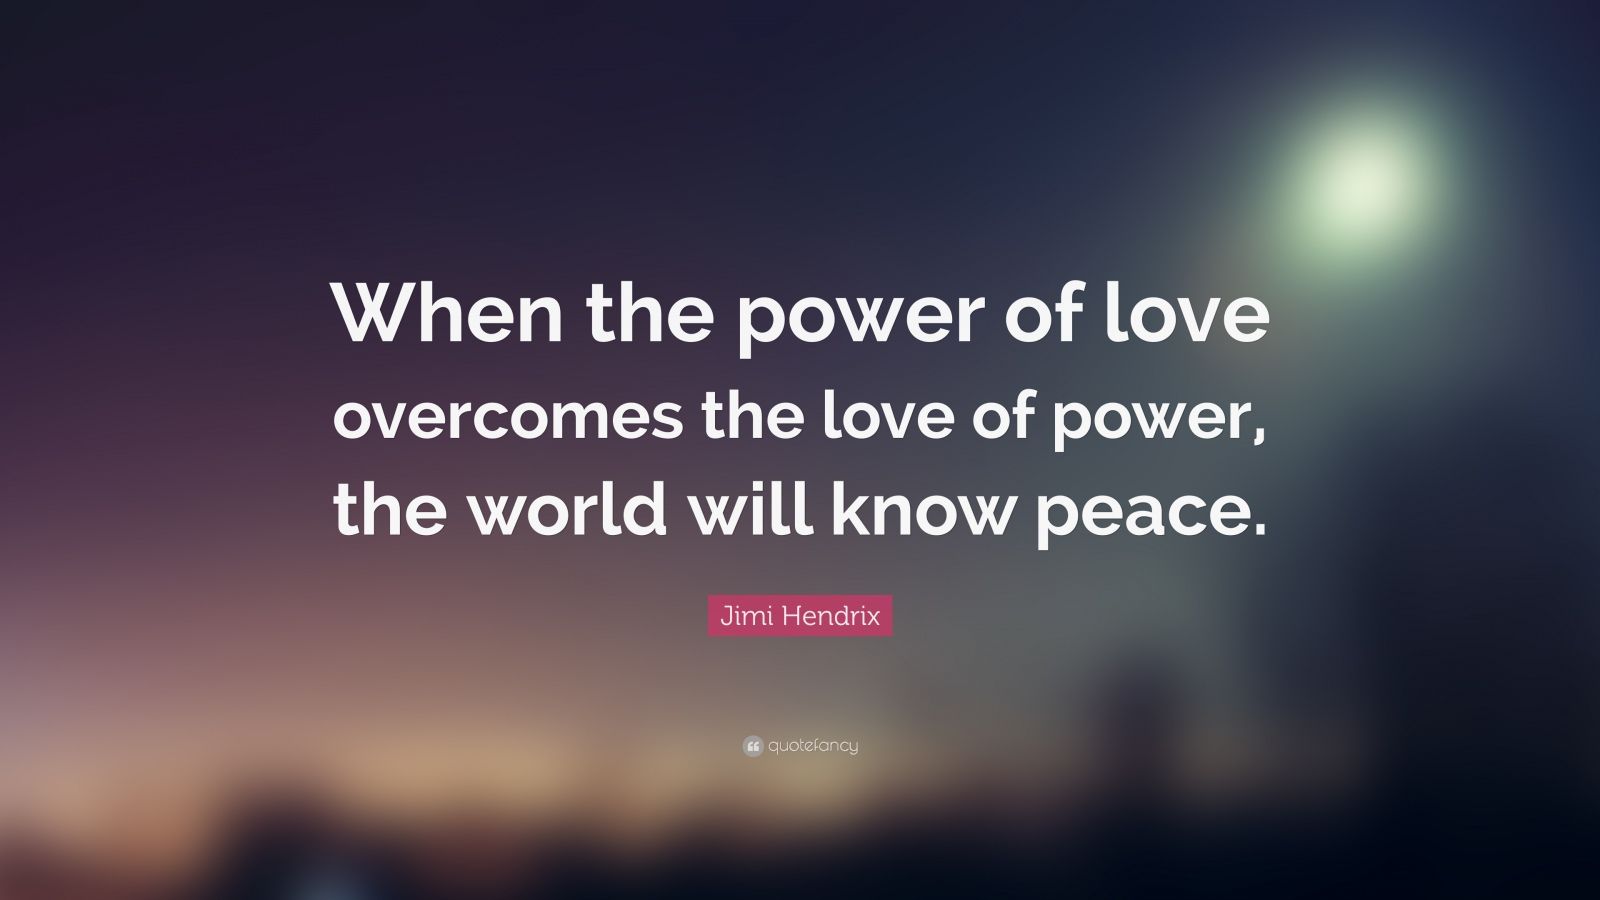 Jimi Hendrix Quote: “When the power of love overcomes the love of power